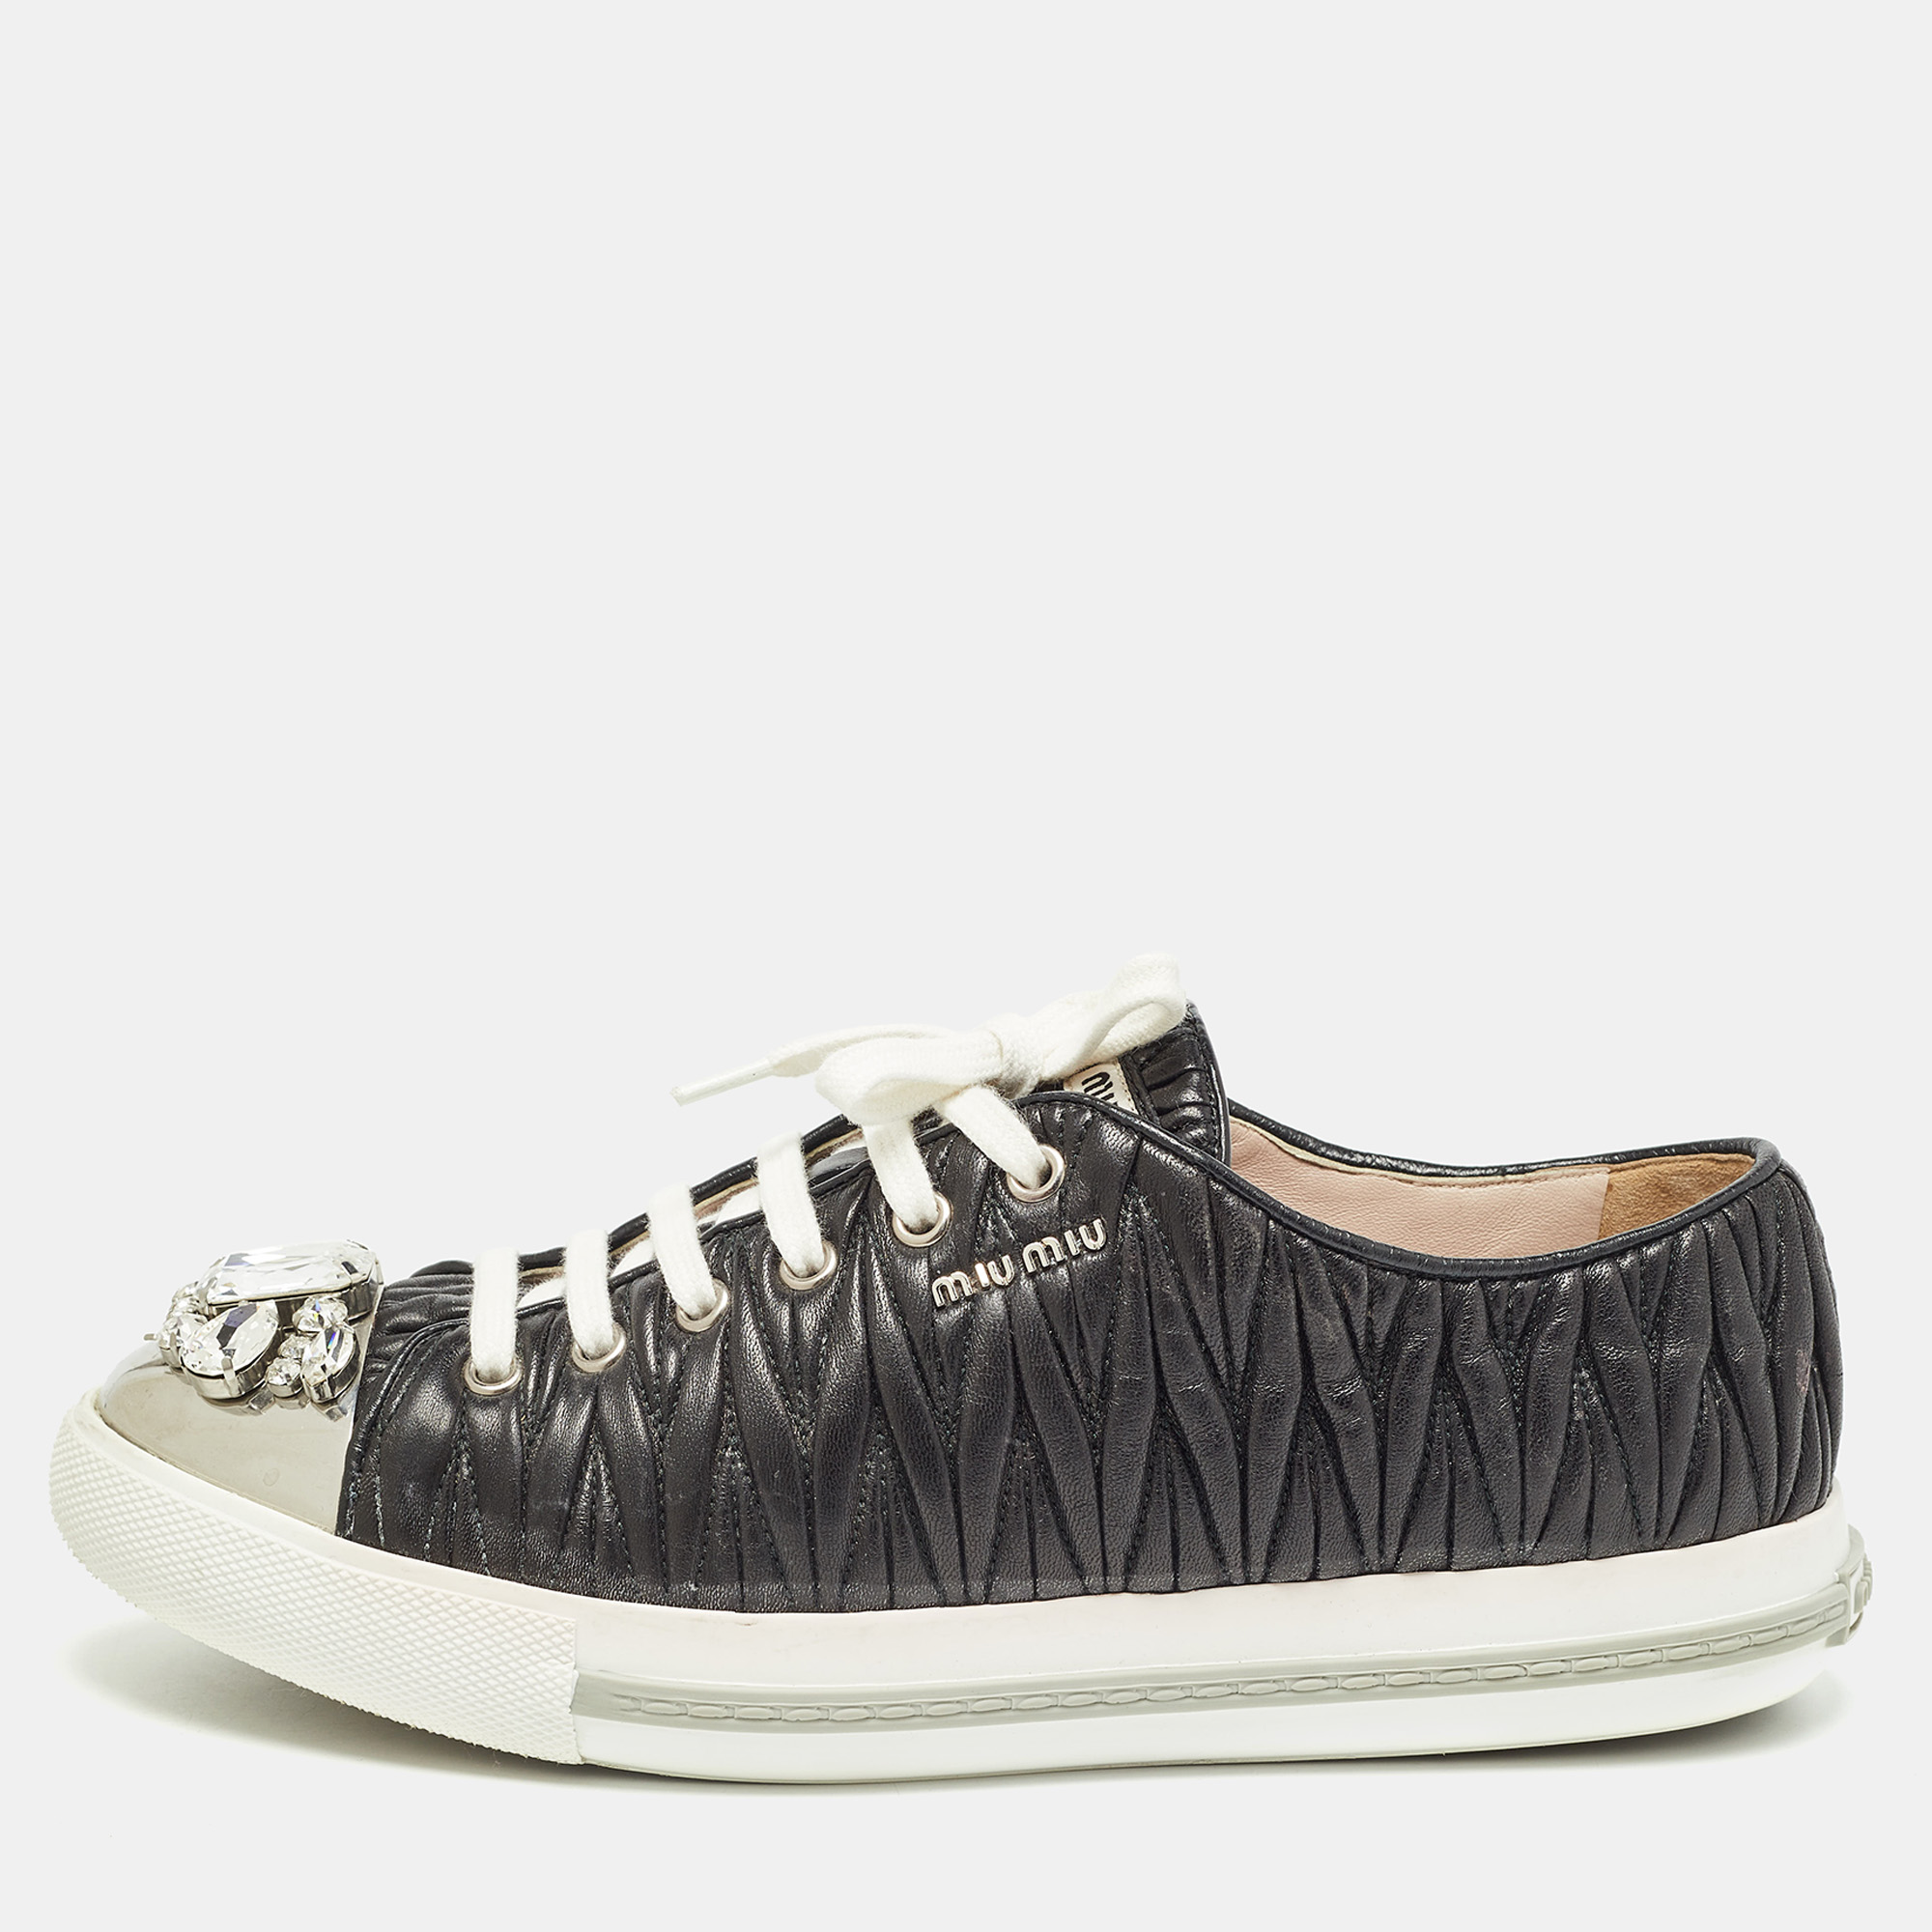 

Miu Miu Black Pleated Leather Crystal Embellished Toe Cap Low Top Sneakers Size